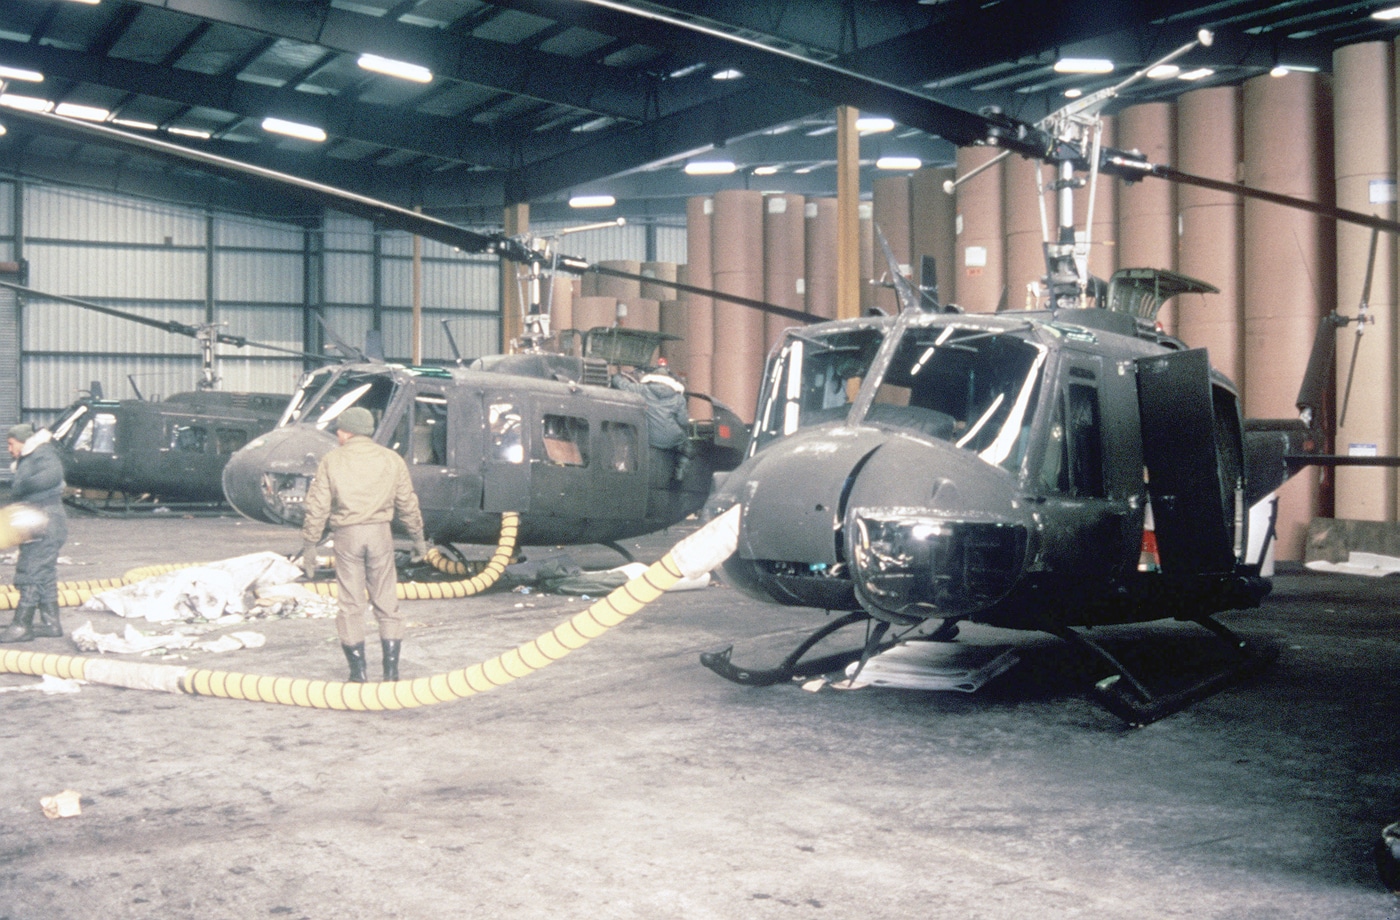 In this photo, we see ground crews unpack and prepare UH-1 Iroquois helicopters for flight in a port warehouse during Exercise REFORGER '85. Exercise Campaign Reforger ("REturn of FORces to GERmany") was an annual military exercise and campaign conducted by NATO during the Cold War.